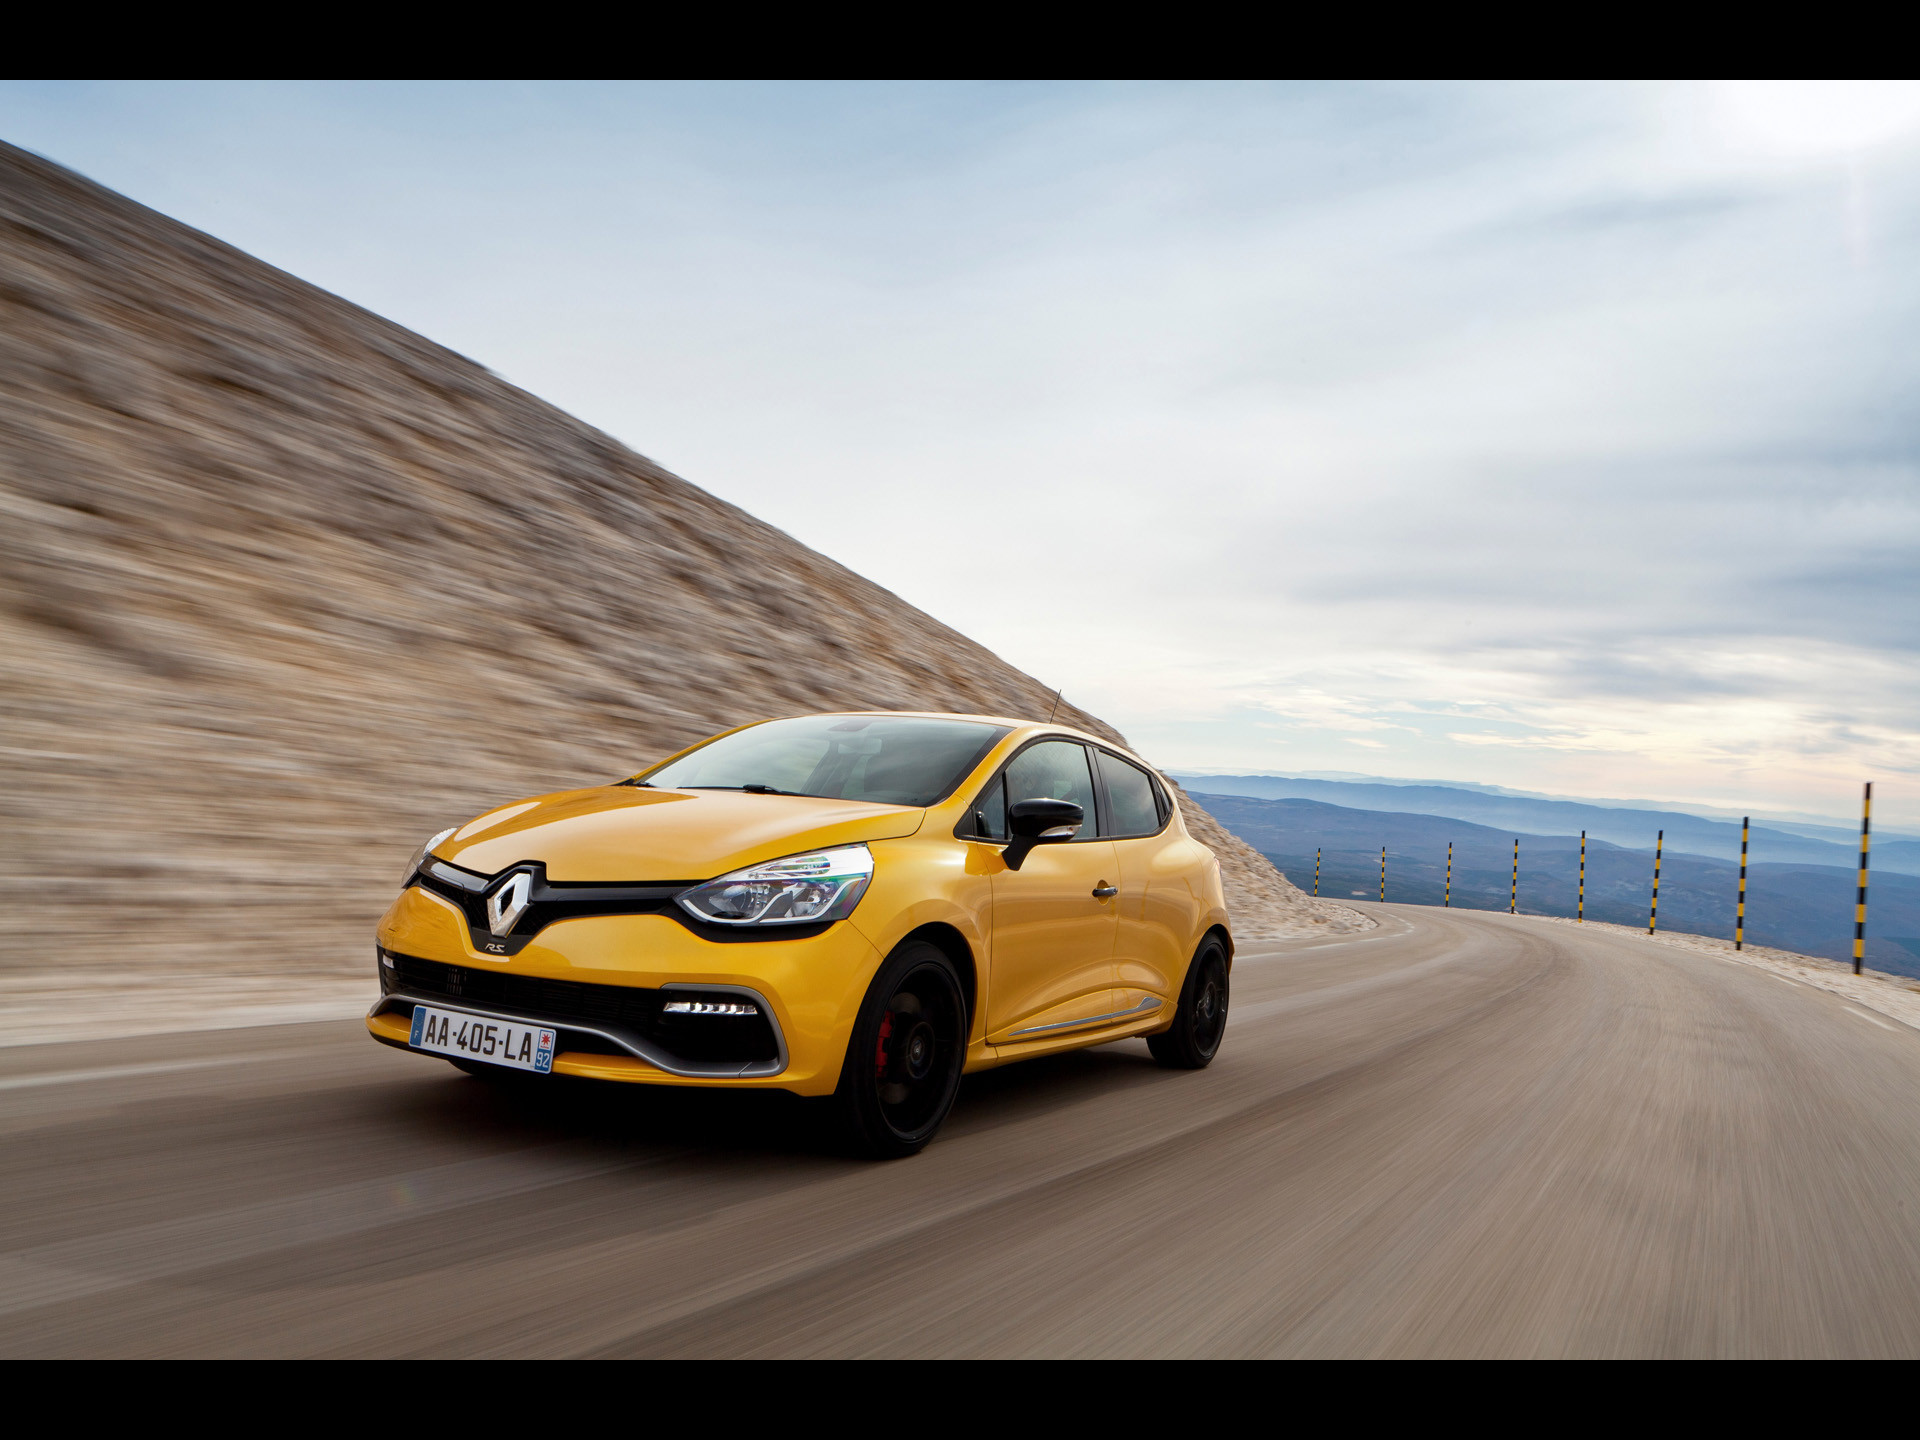 2013 Renault Clio Rs 200 Edc Hd Wallpaper Background Image 1920x1440 Id 376074 Wallpaper Abyss 1920x1440